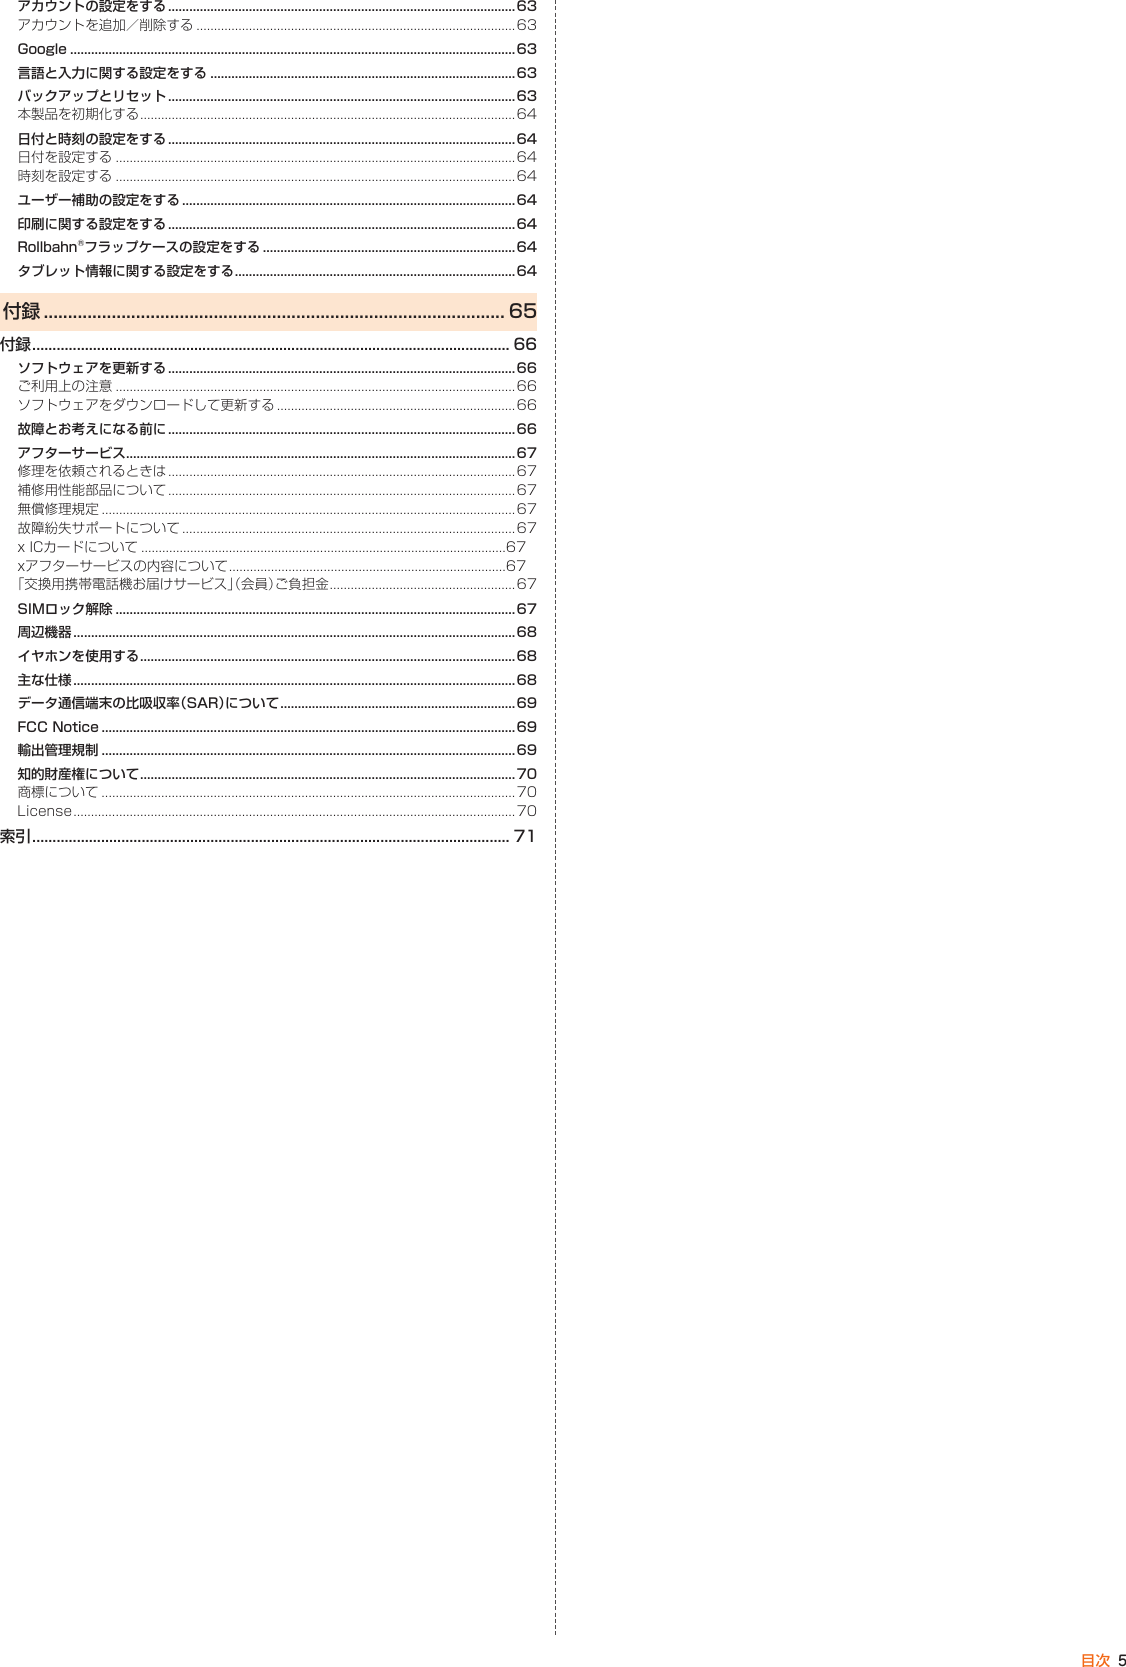 Page 6 of Kyocera FA85 Tablet User Manual 2